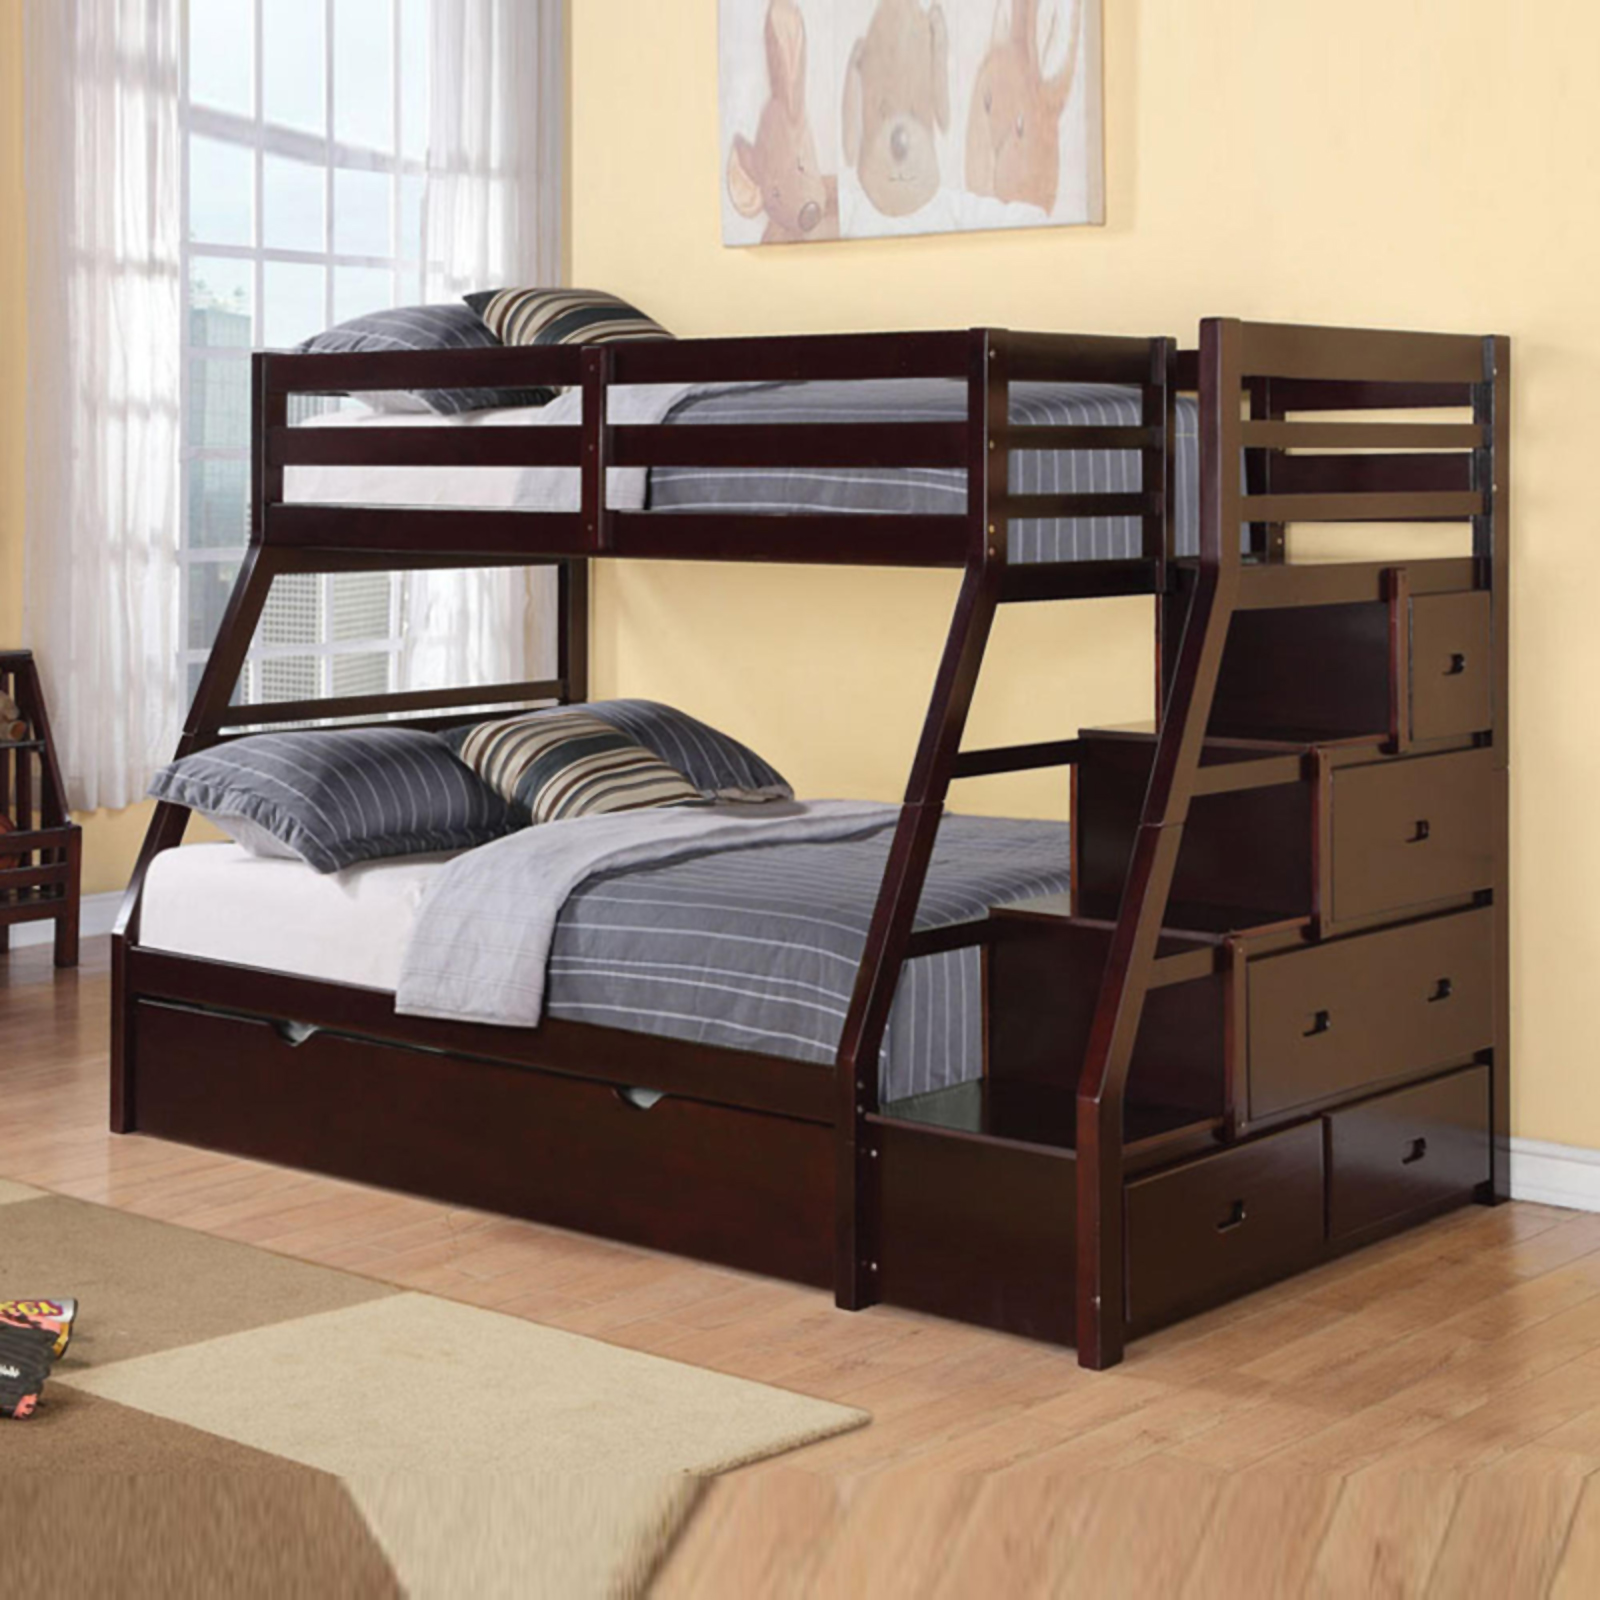 Acme Furniture Twin Over Full Stairway Chest Bunk Bed with Trundle - Espresso